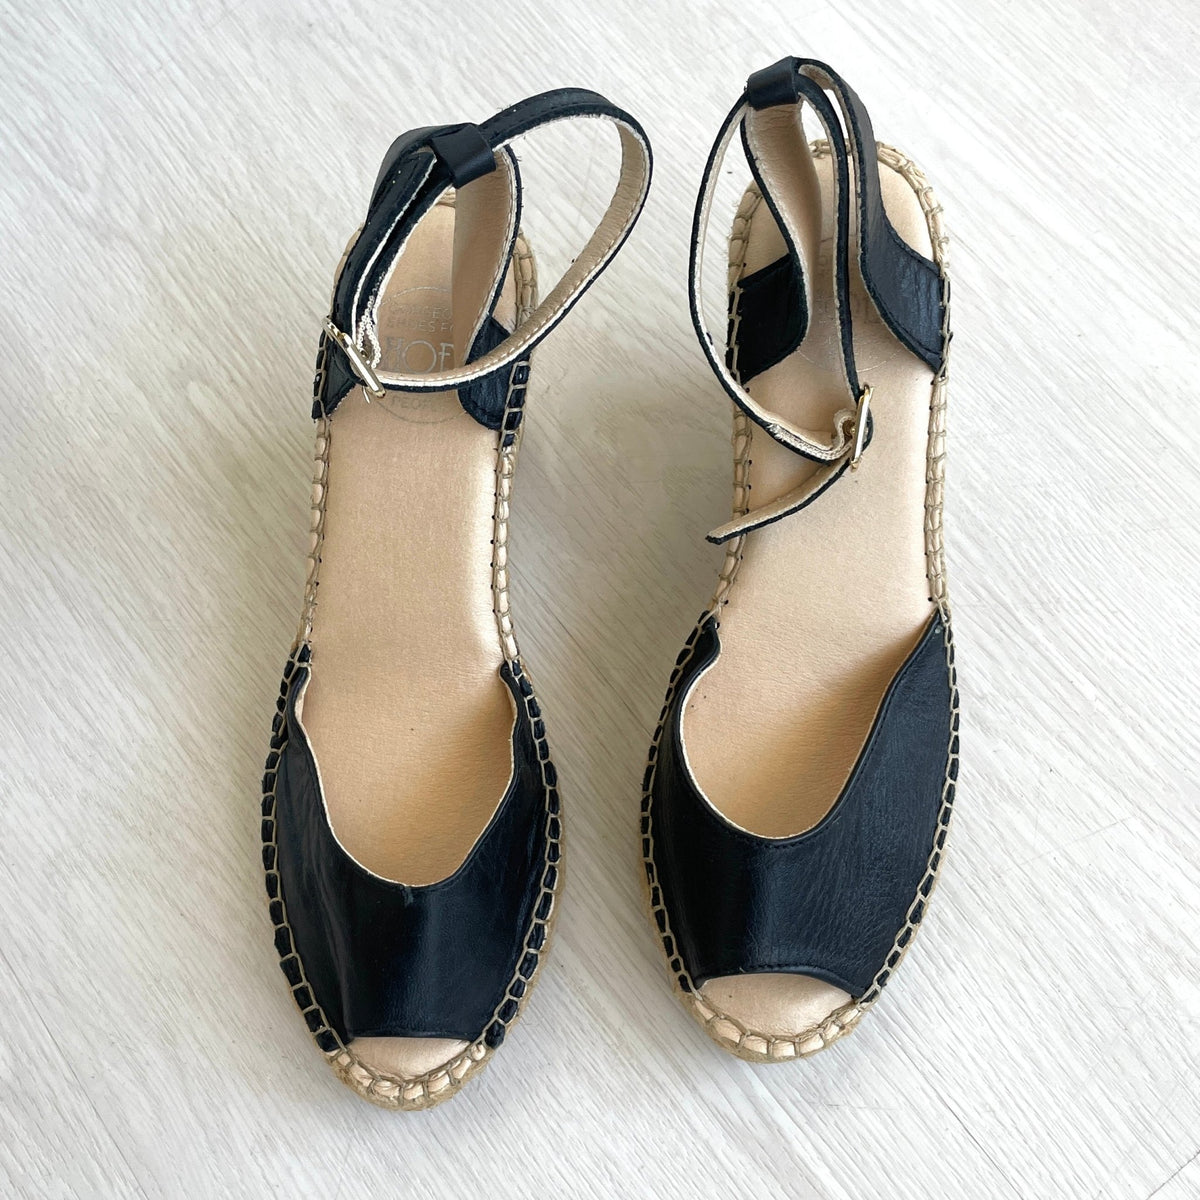 Peep Toe Espadrille Wedge in Midnight - Outlet item - Size 36 - Shoeq